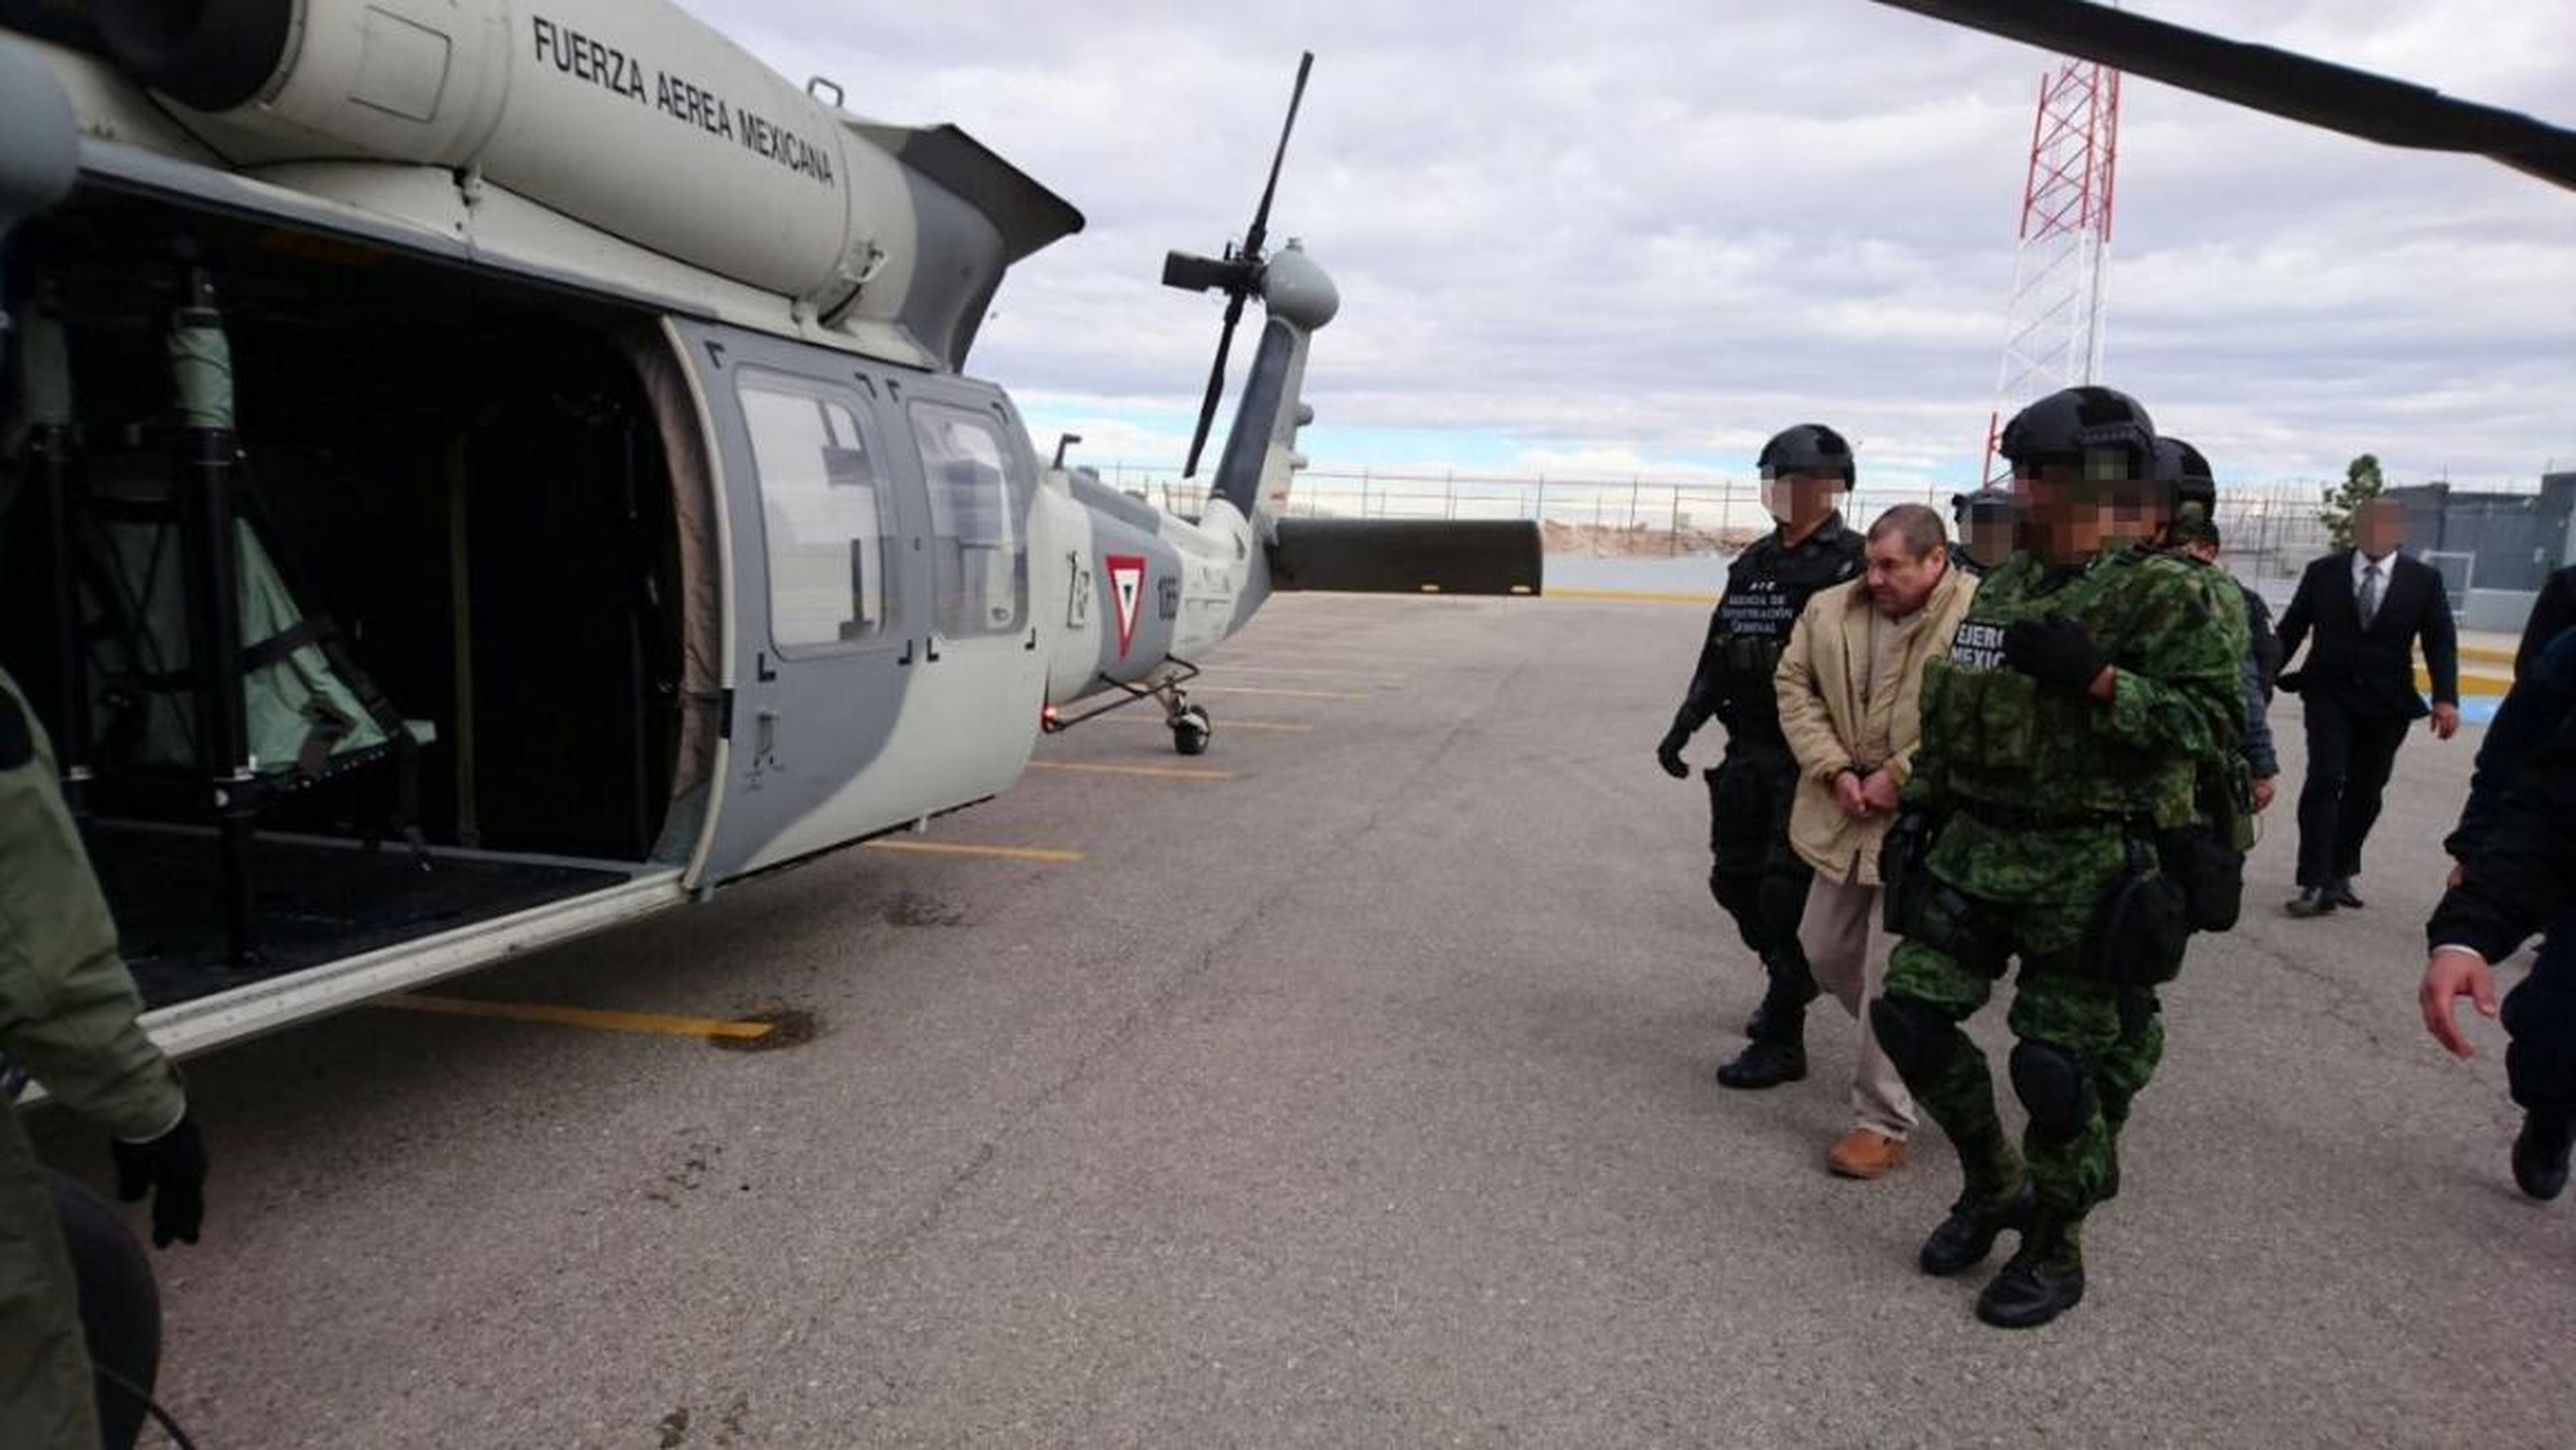 Guzman is escorted to a helicopter by soldiers during his extradition in Ciudad Juarez, Mexico, on January 19, 2017.